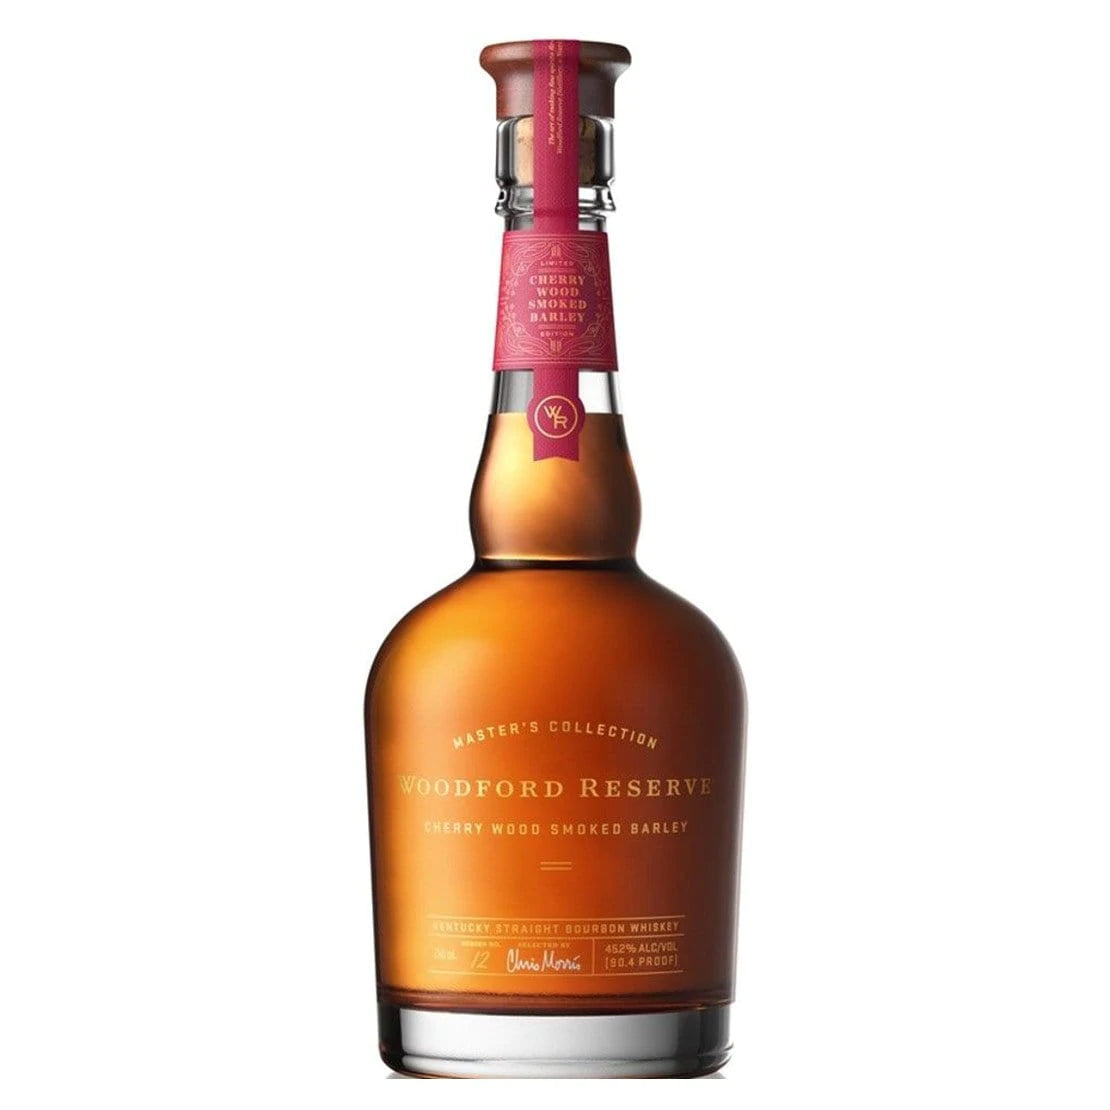 Woodford Reserve Master's Collection Cherry Wood Smoked Barley Bourbon Whiskey 700ml